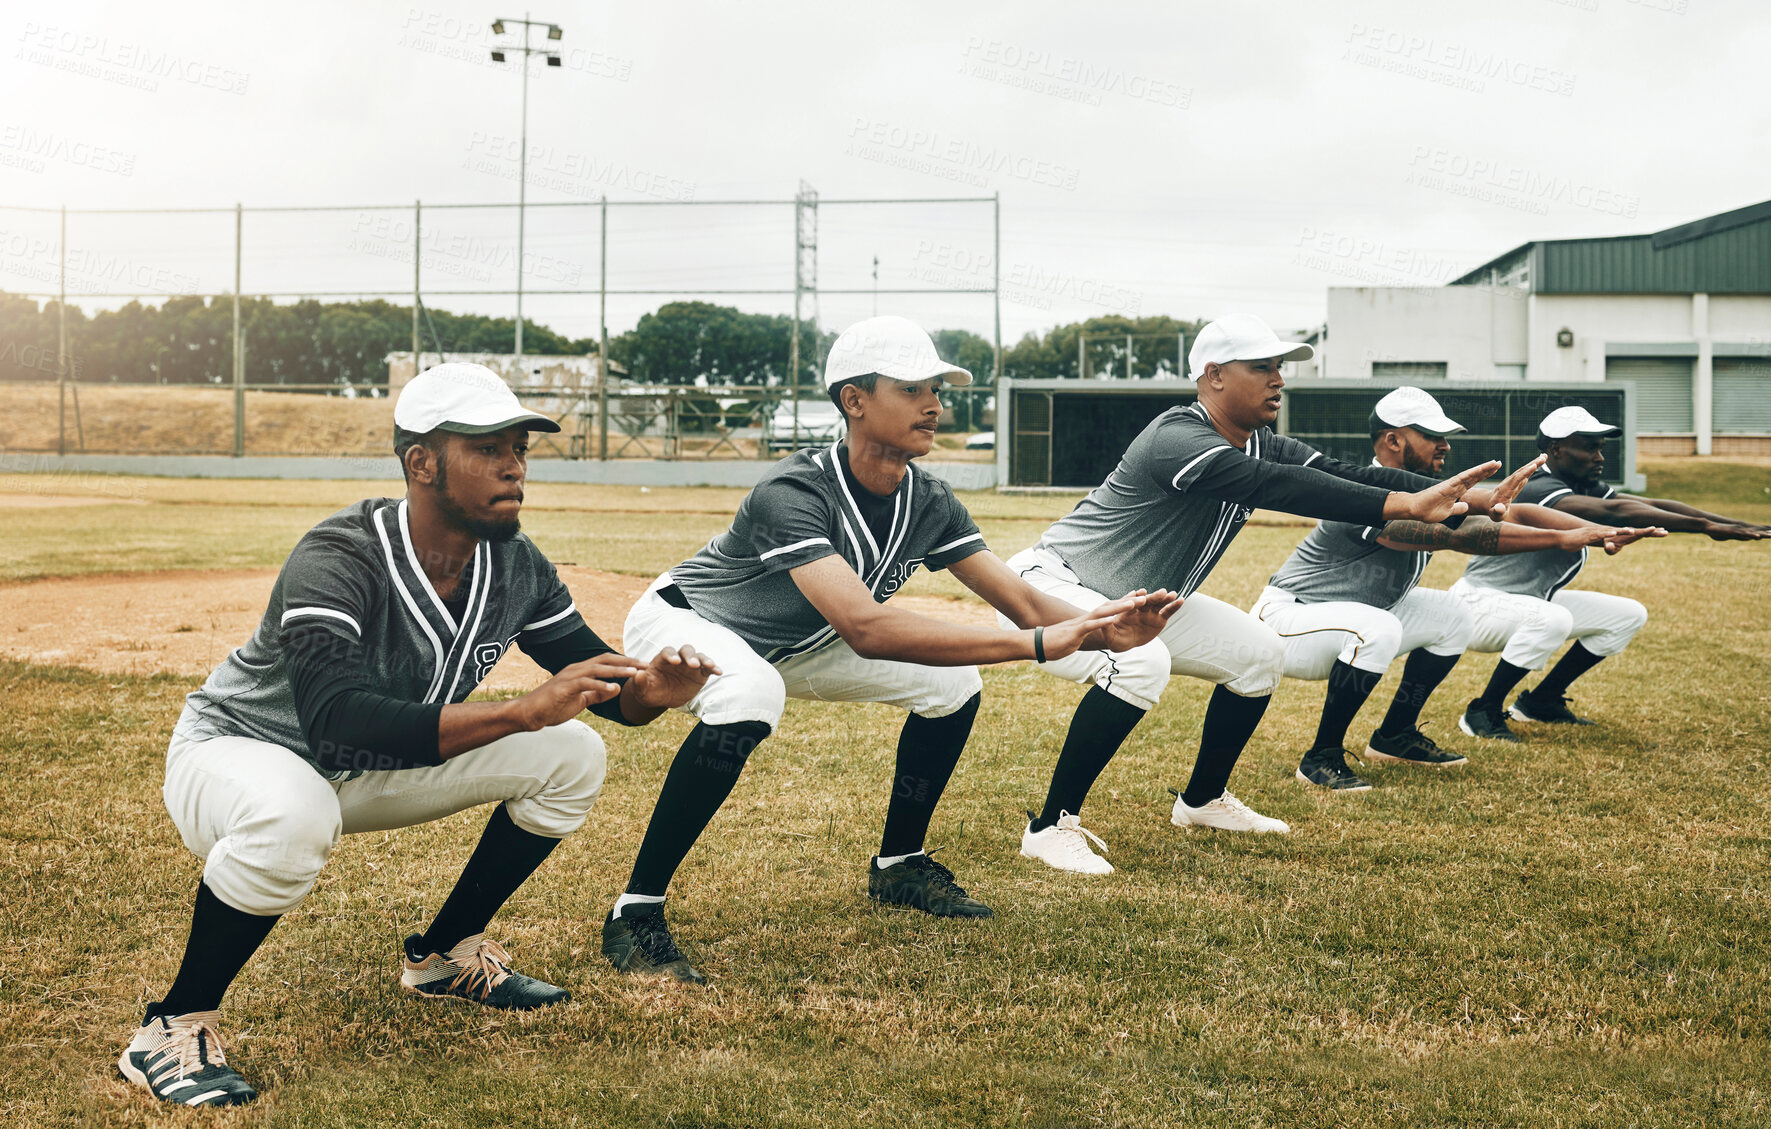 Buy stock photo Sports, baseball and team stretching in training, exercise and fitness workout on a baseball field in Houston, USA. Teamwork, softball and healthy group of men ready to start playing a match game 